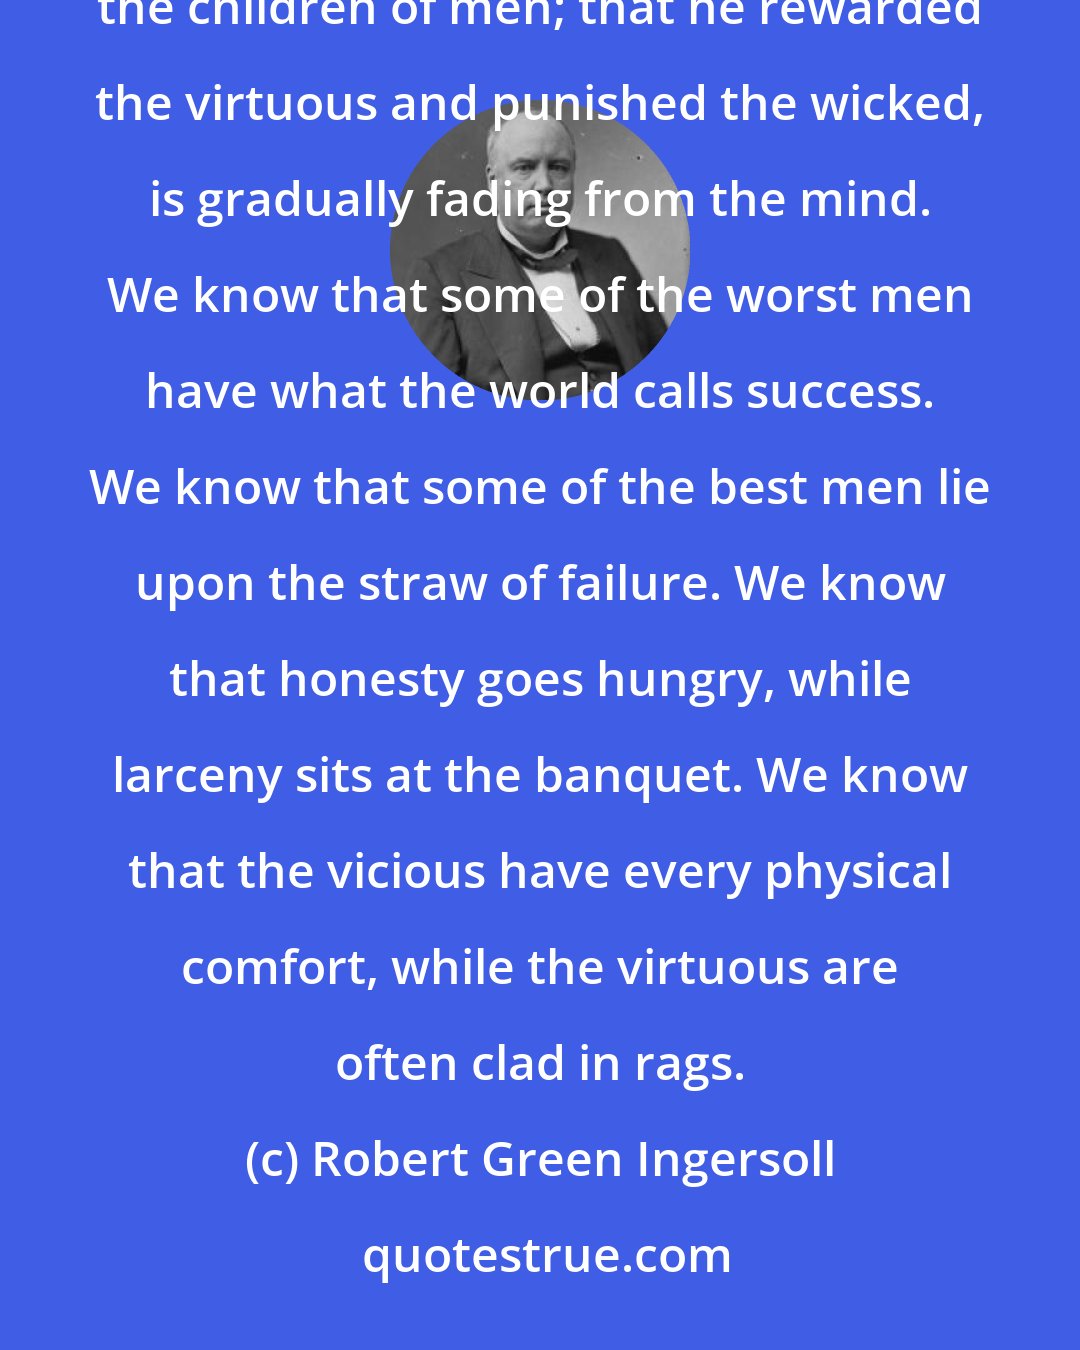 Robert Green Ingersoll: The old doctrine that God wanted man to do something for him, and that he kept a watchful eye upon all the children of men; that he rewarded the virtuous and punished the wicked, is gradually fading from the mind. We know that some of the worst men have what the world calls success. We know that some of the best men lie upon the straw of failure. We know that honesty goes hungry, while larceny sits at the banquet. We know that the vicious have every physical comfort, while the virtuous are often clad in rags.